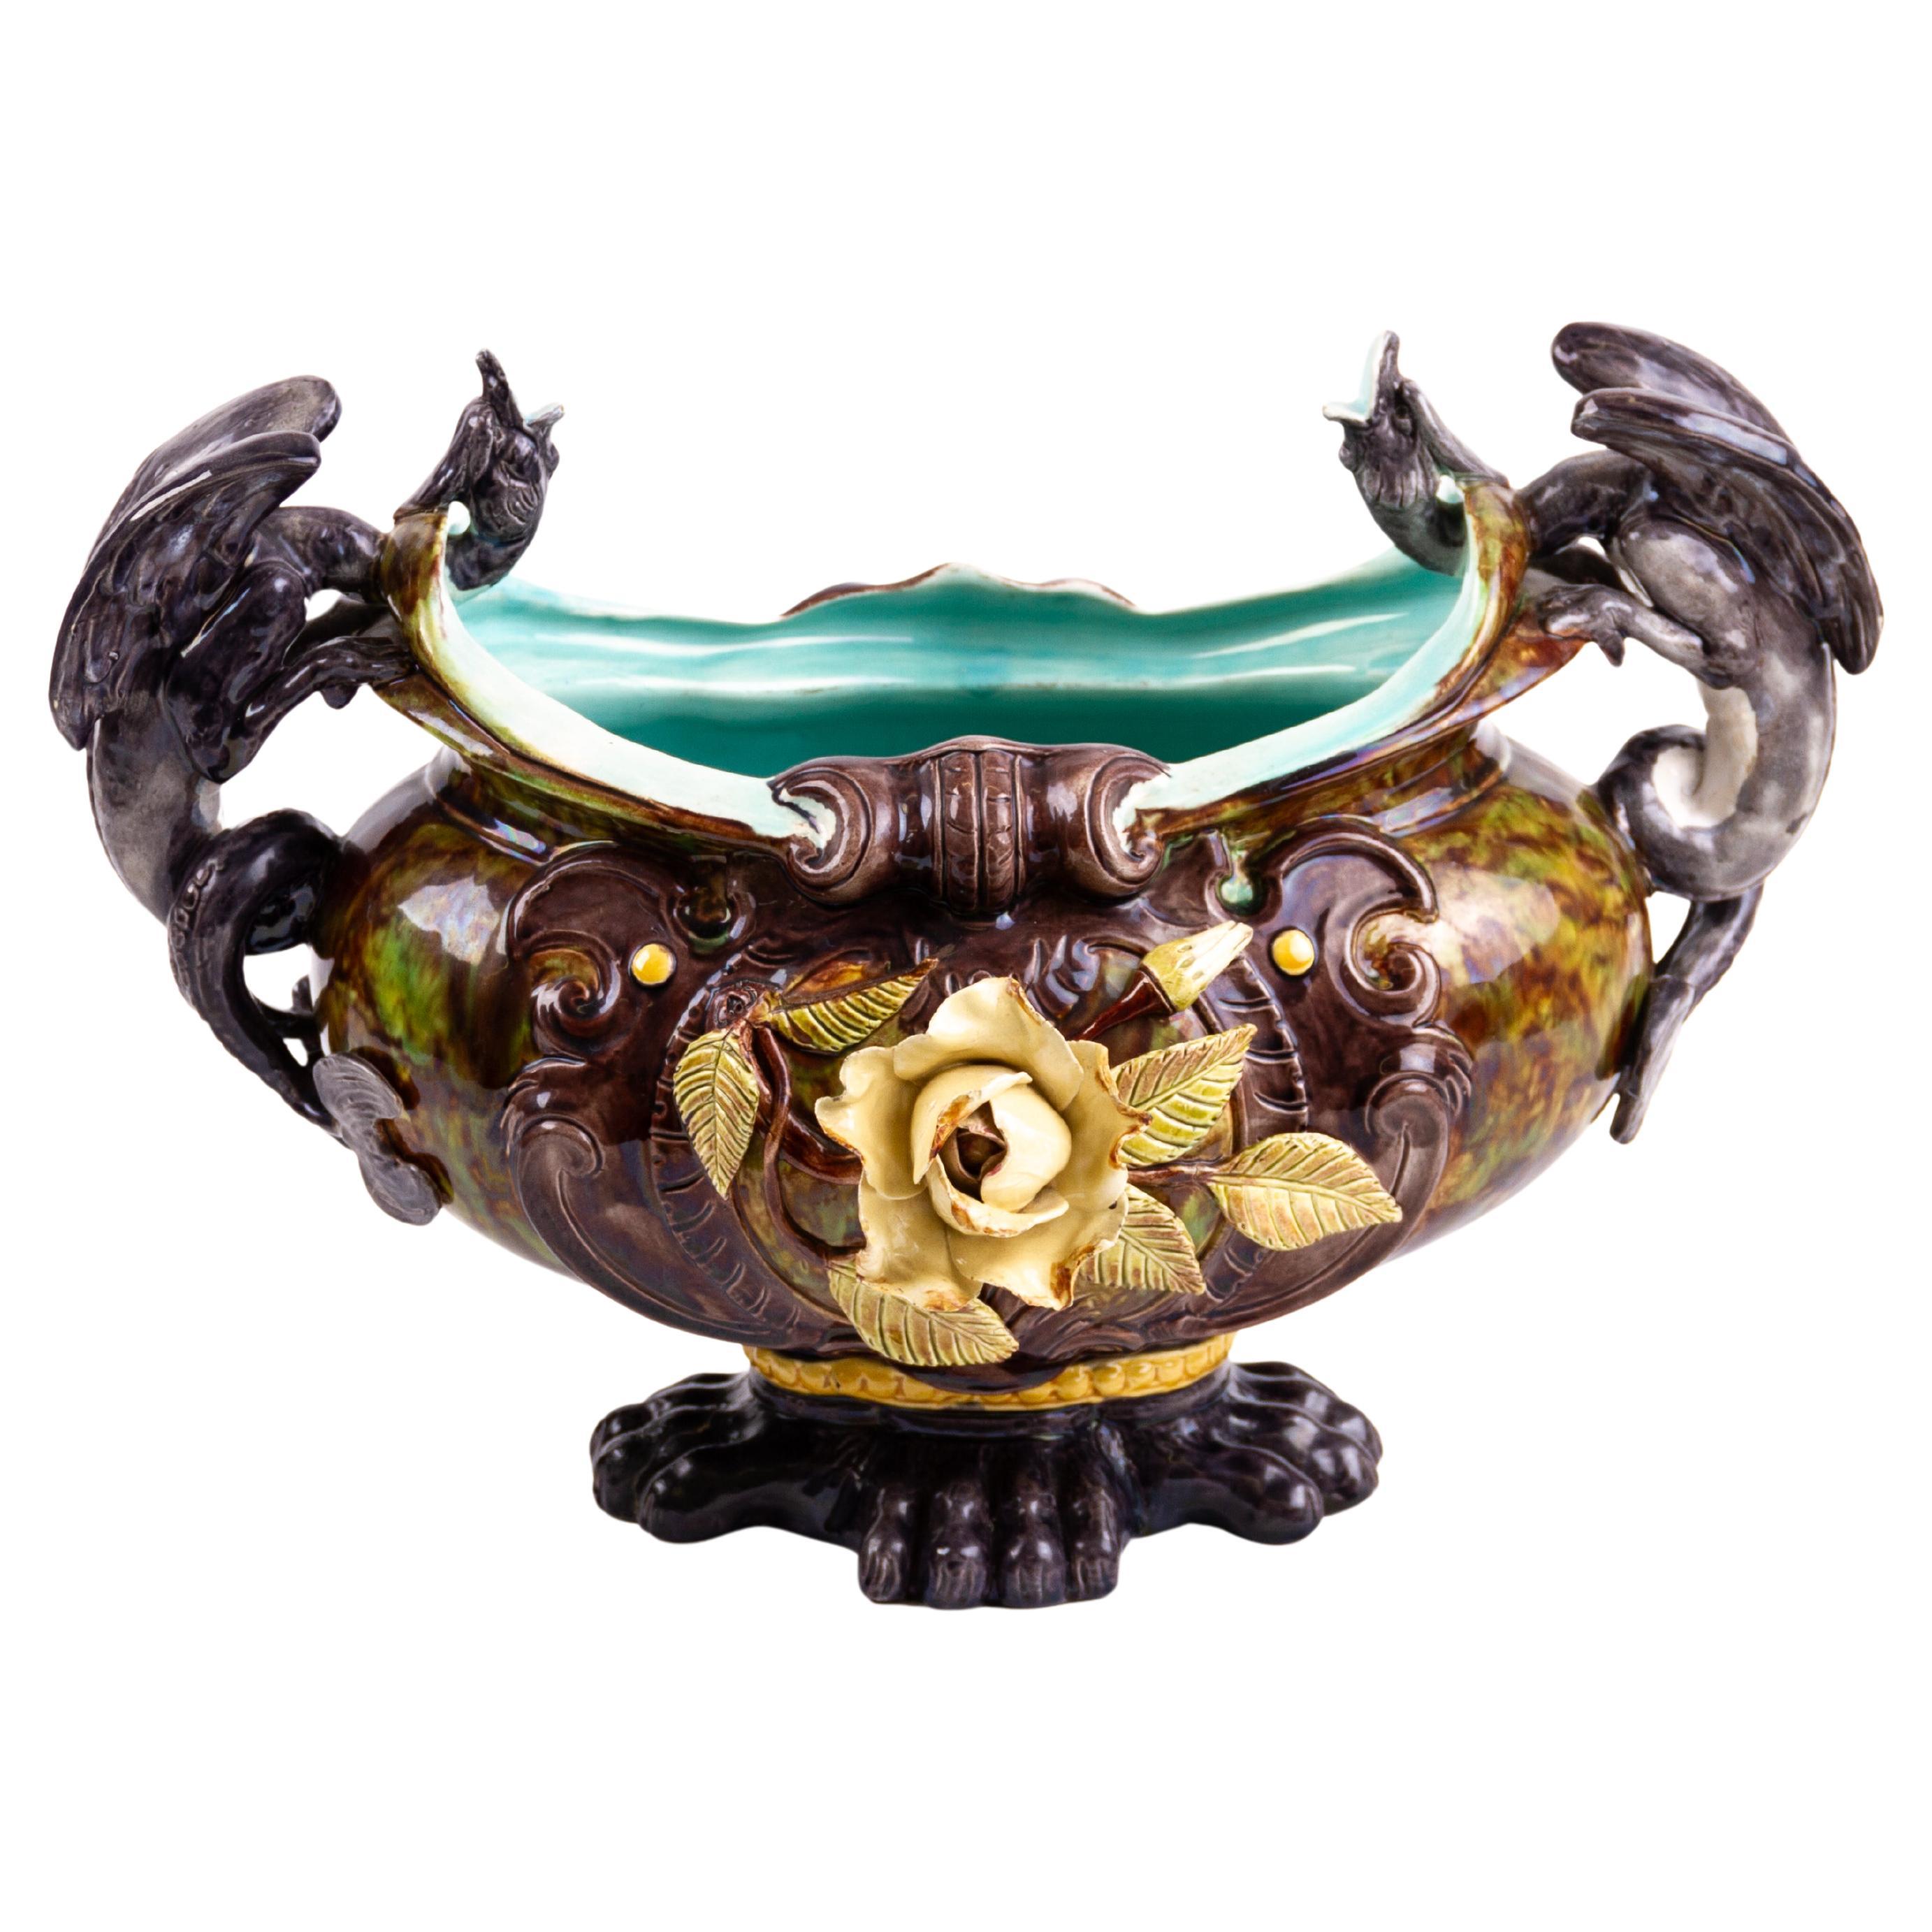 Gothic French Majolica Centrepiece Planter Jardiniere 19th Century For Sale